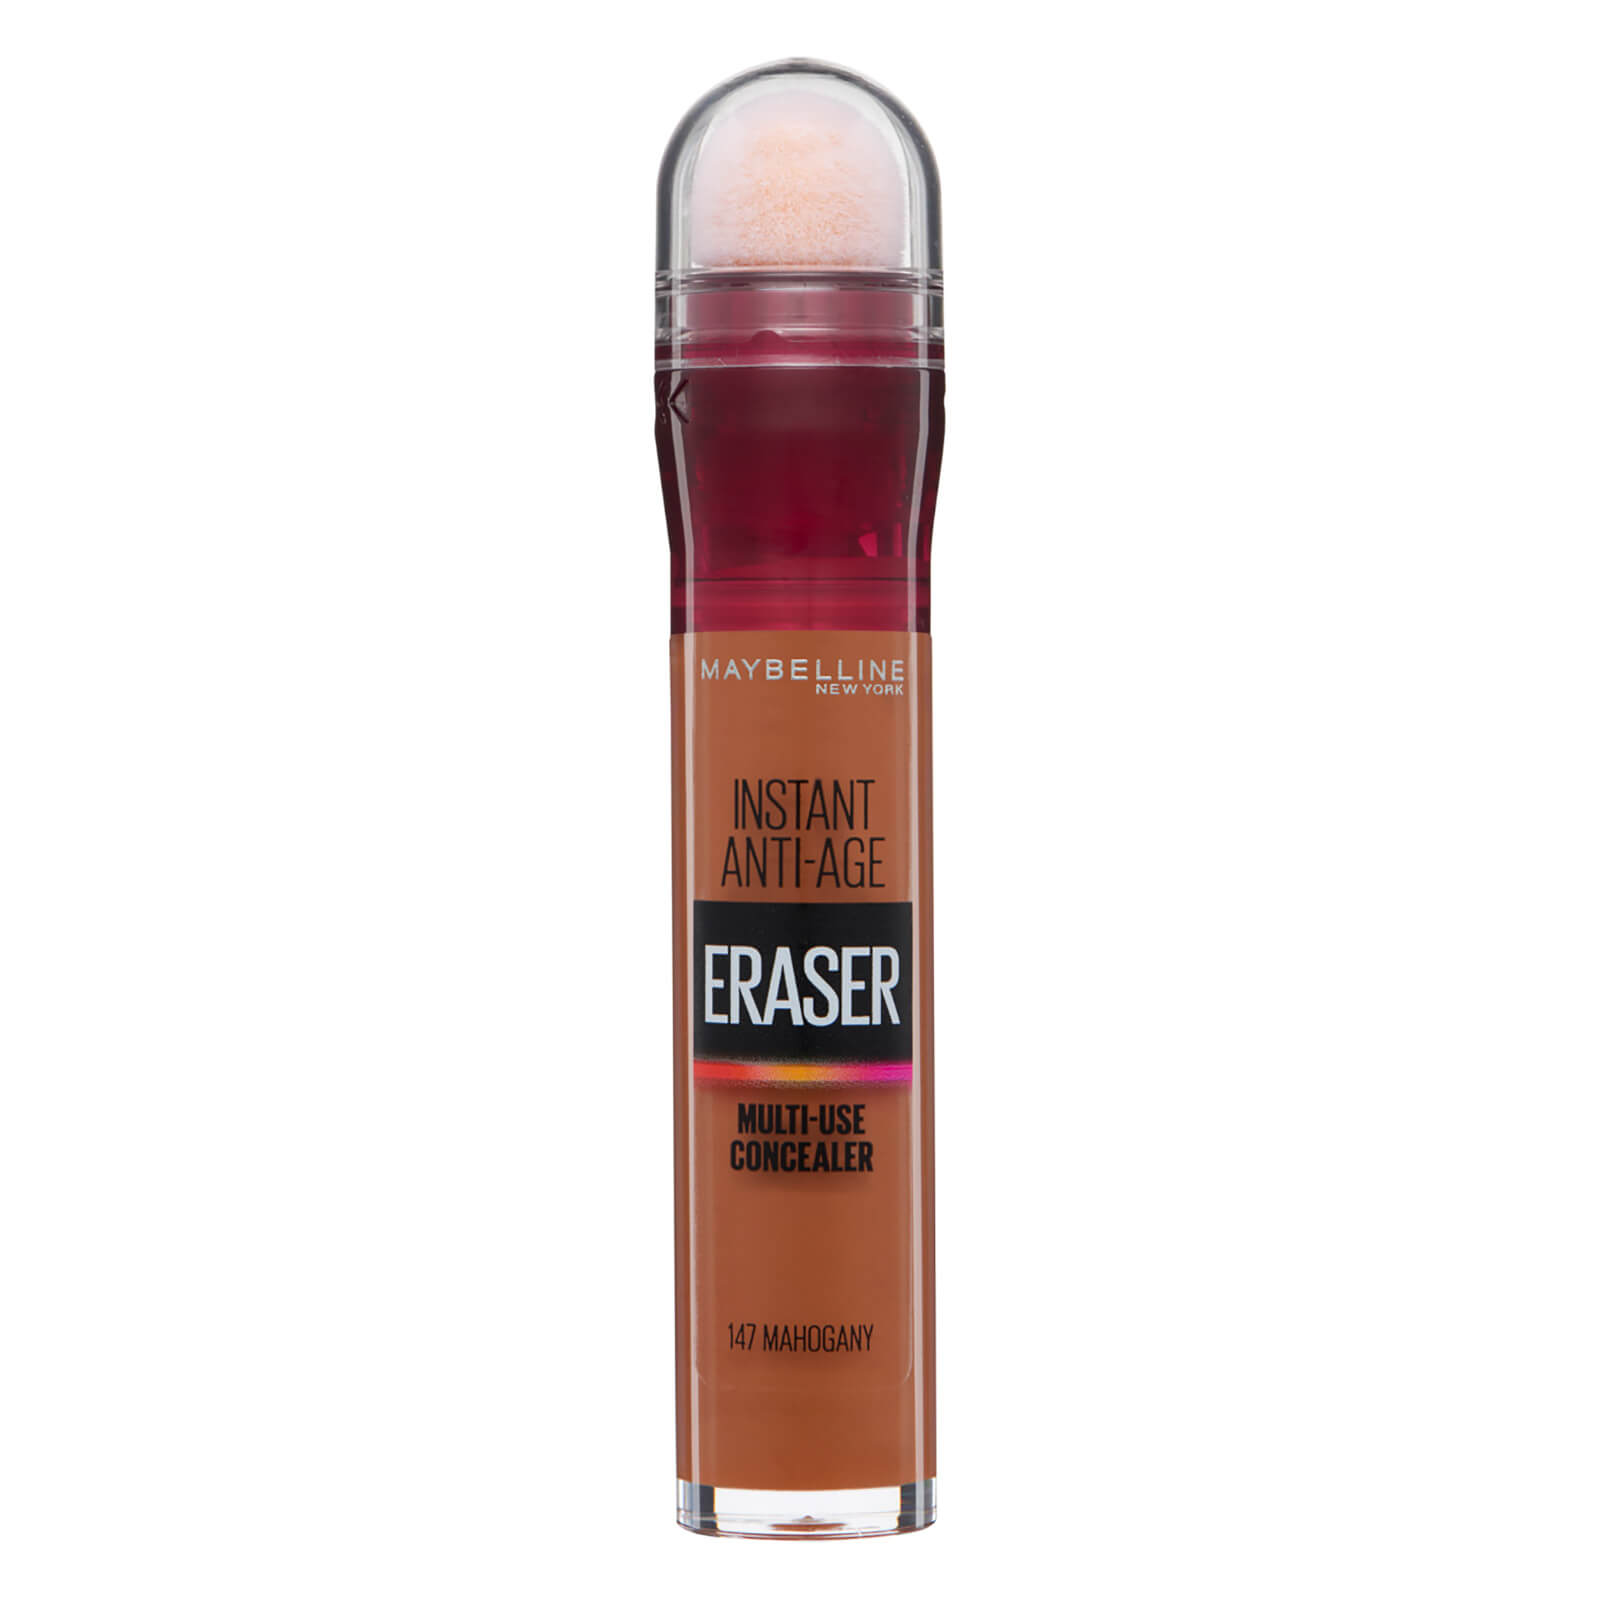 Maybelline Instant Anti Age Eraser Concealer 6.8ml (Various Shades) - 4 147 Terracotta